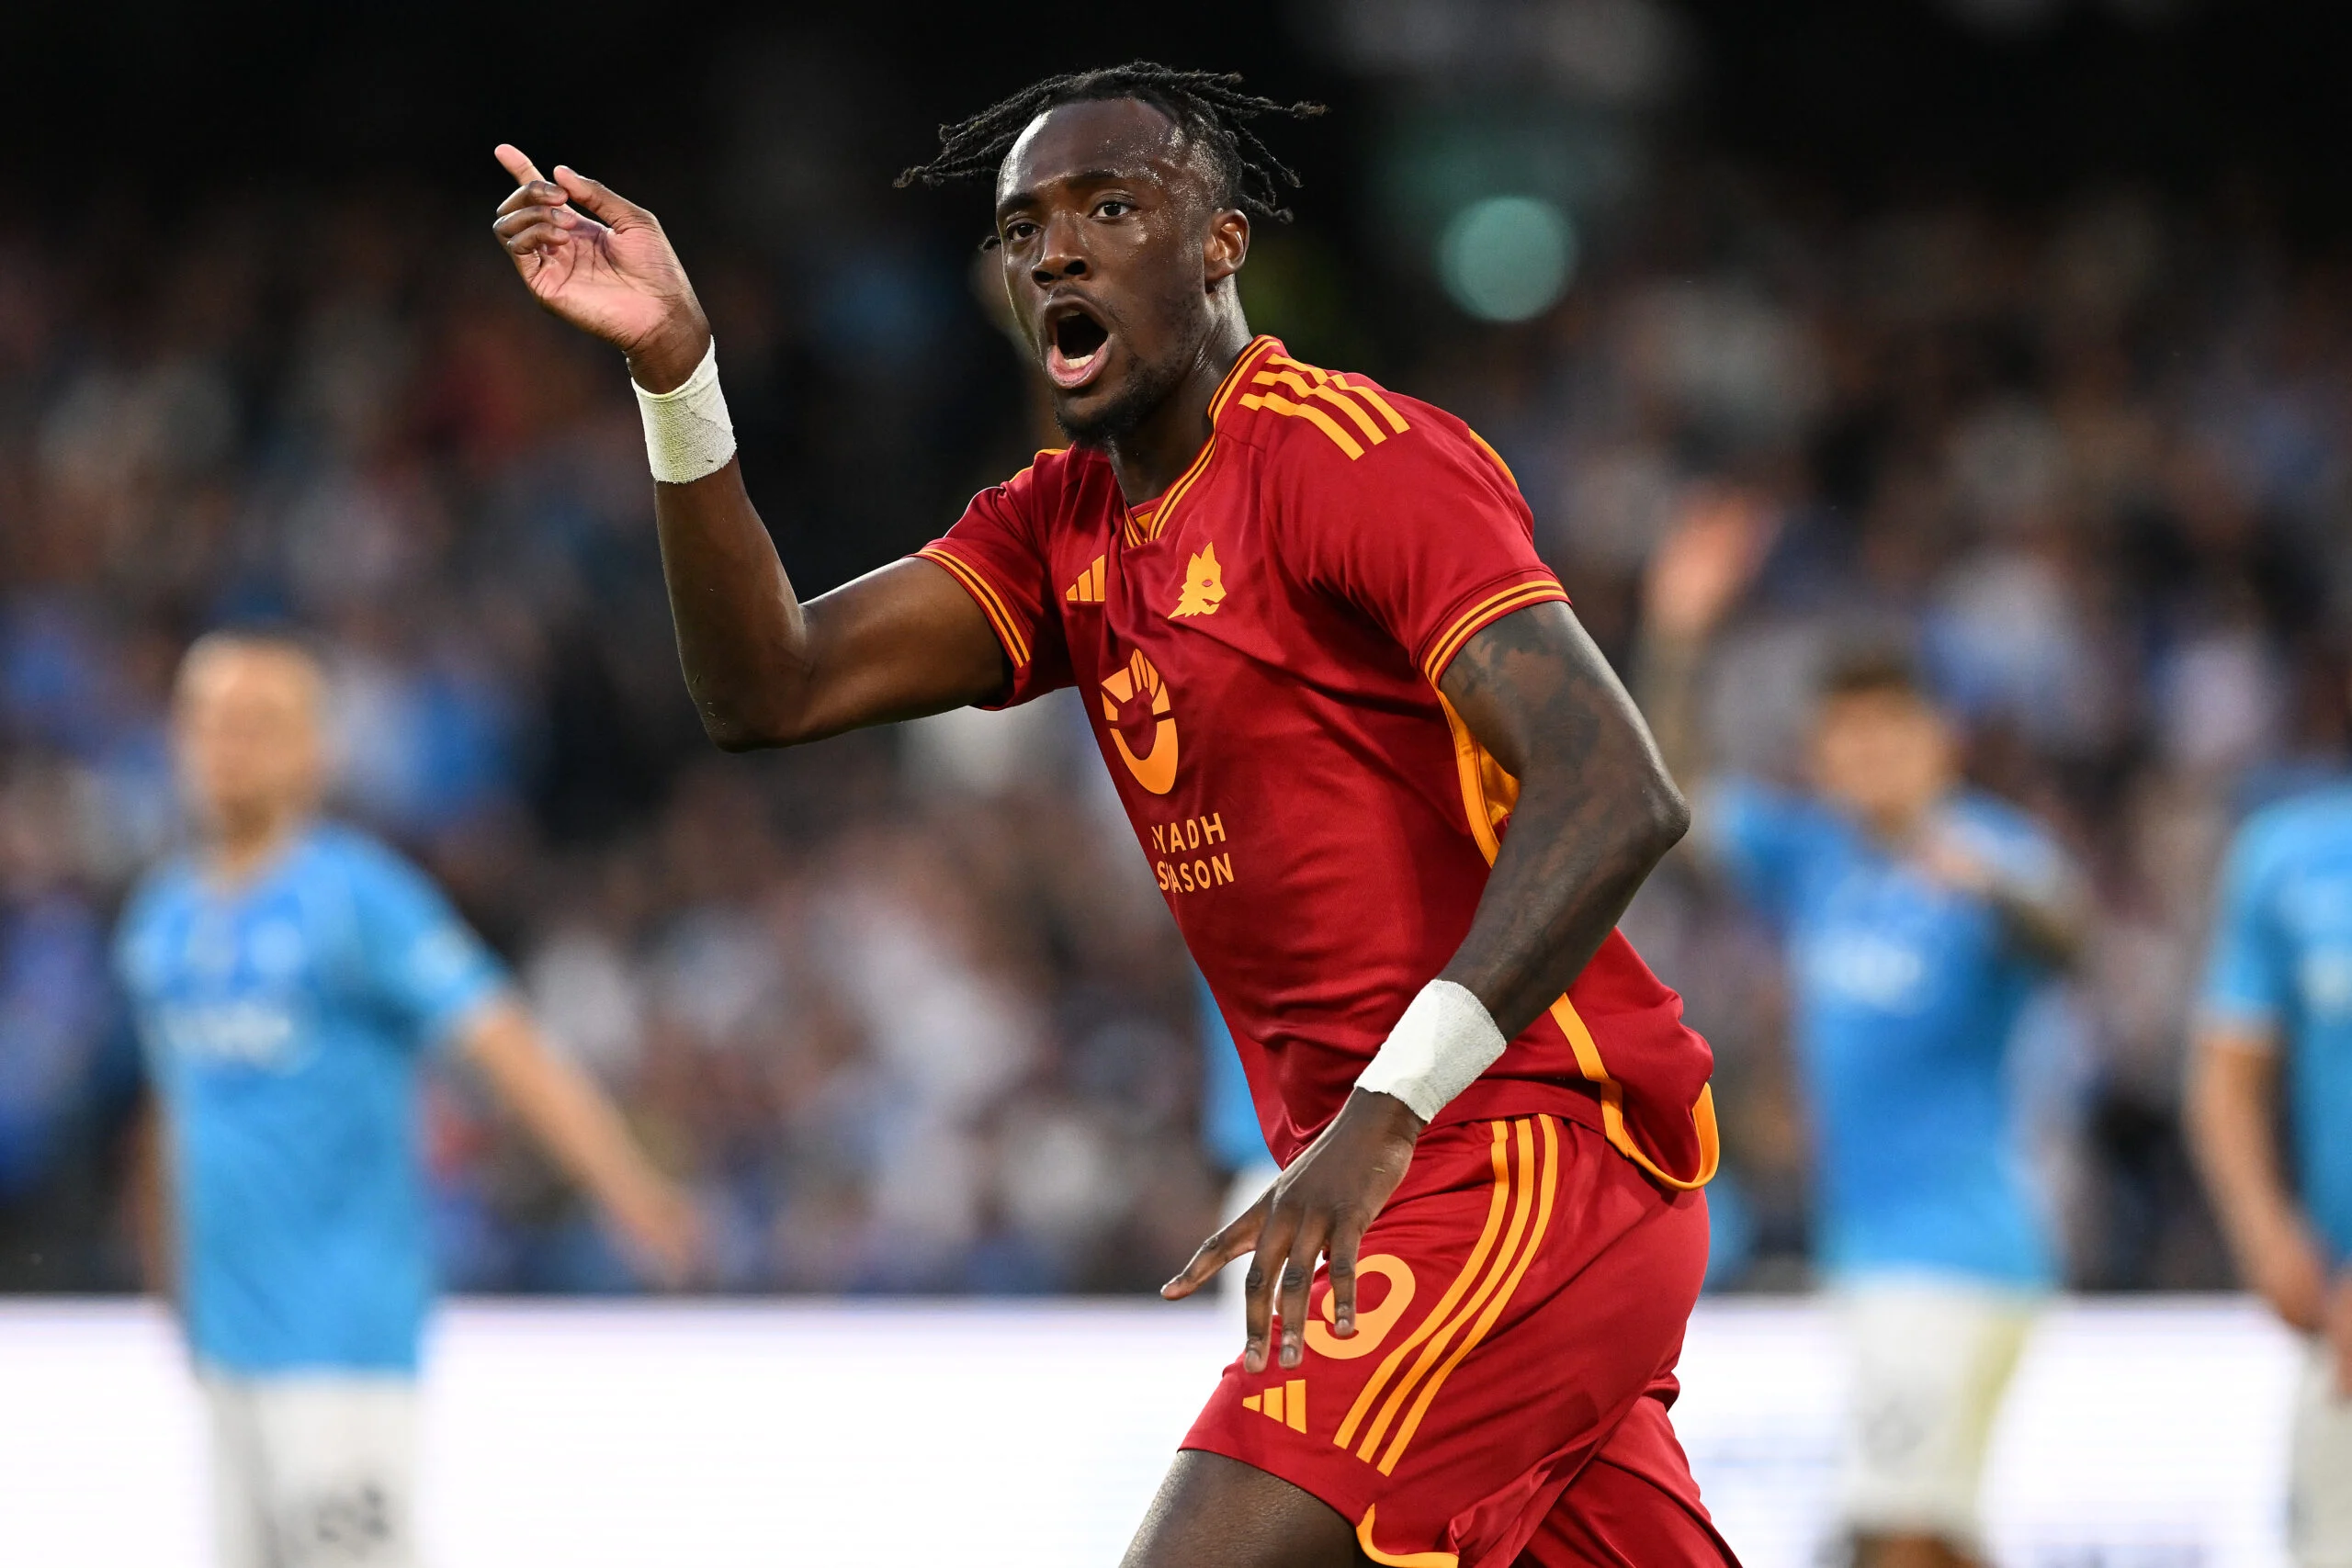 Tammy Abraham rescued Roma against Napoli scoring his first goal in almost exactly a year since he missed months due to an ACL tear.